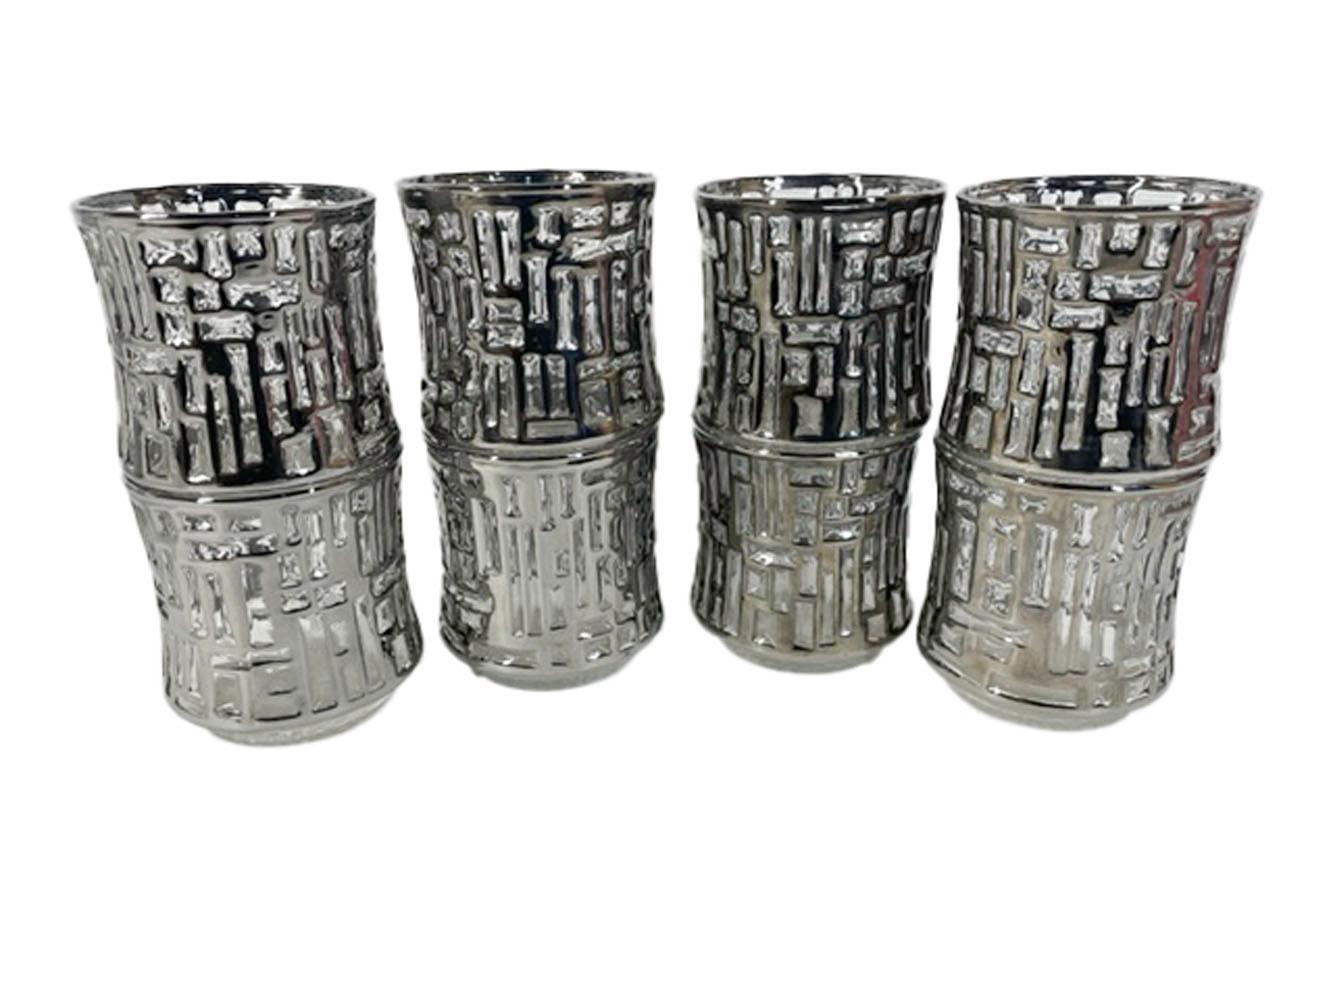 Brutalist 8 Vintage Rocks Glasses in the Silver Version of the Artica Pattern by Libbey For Sale